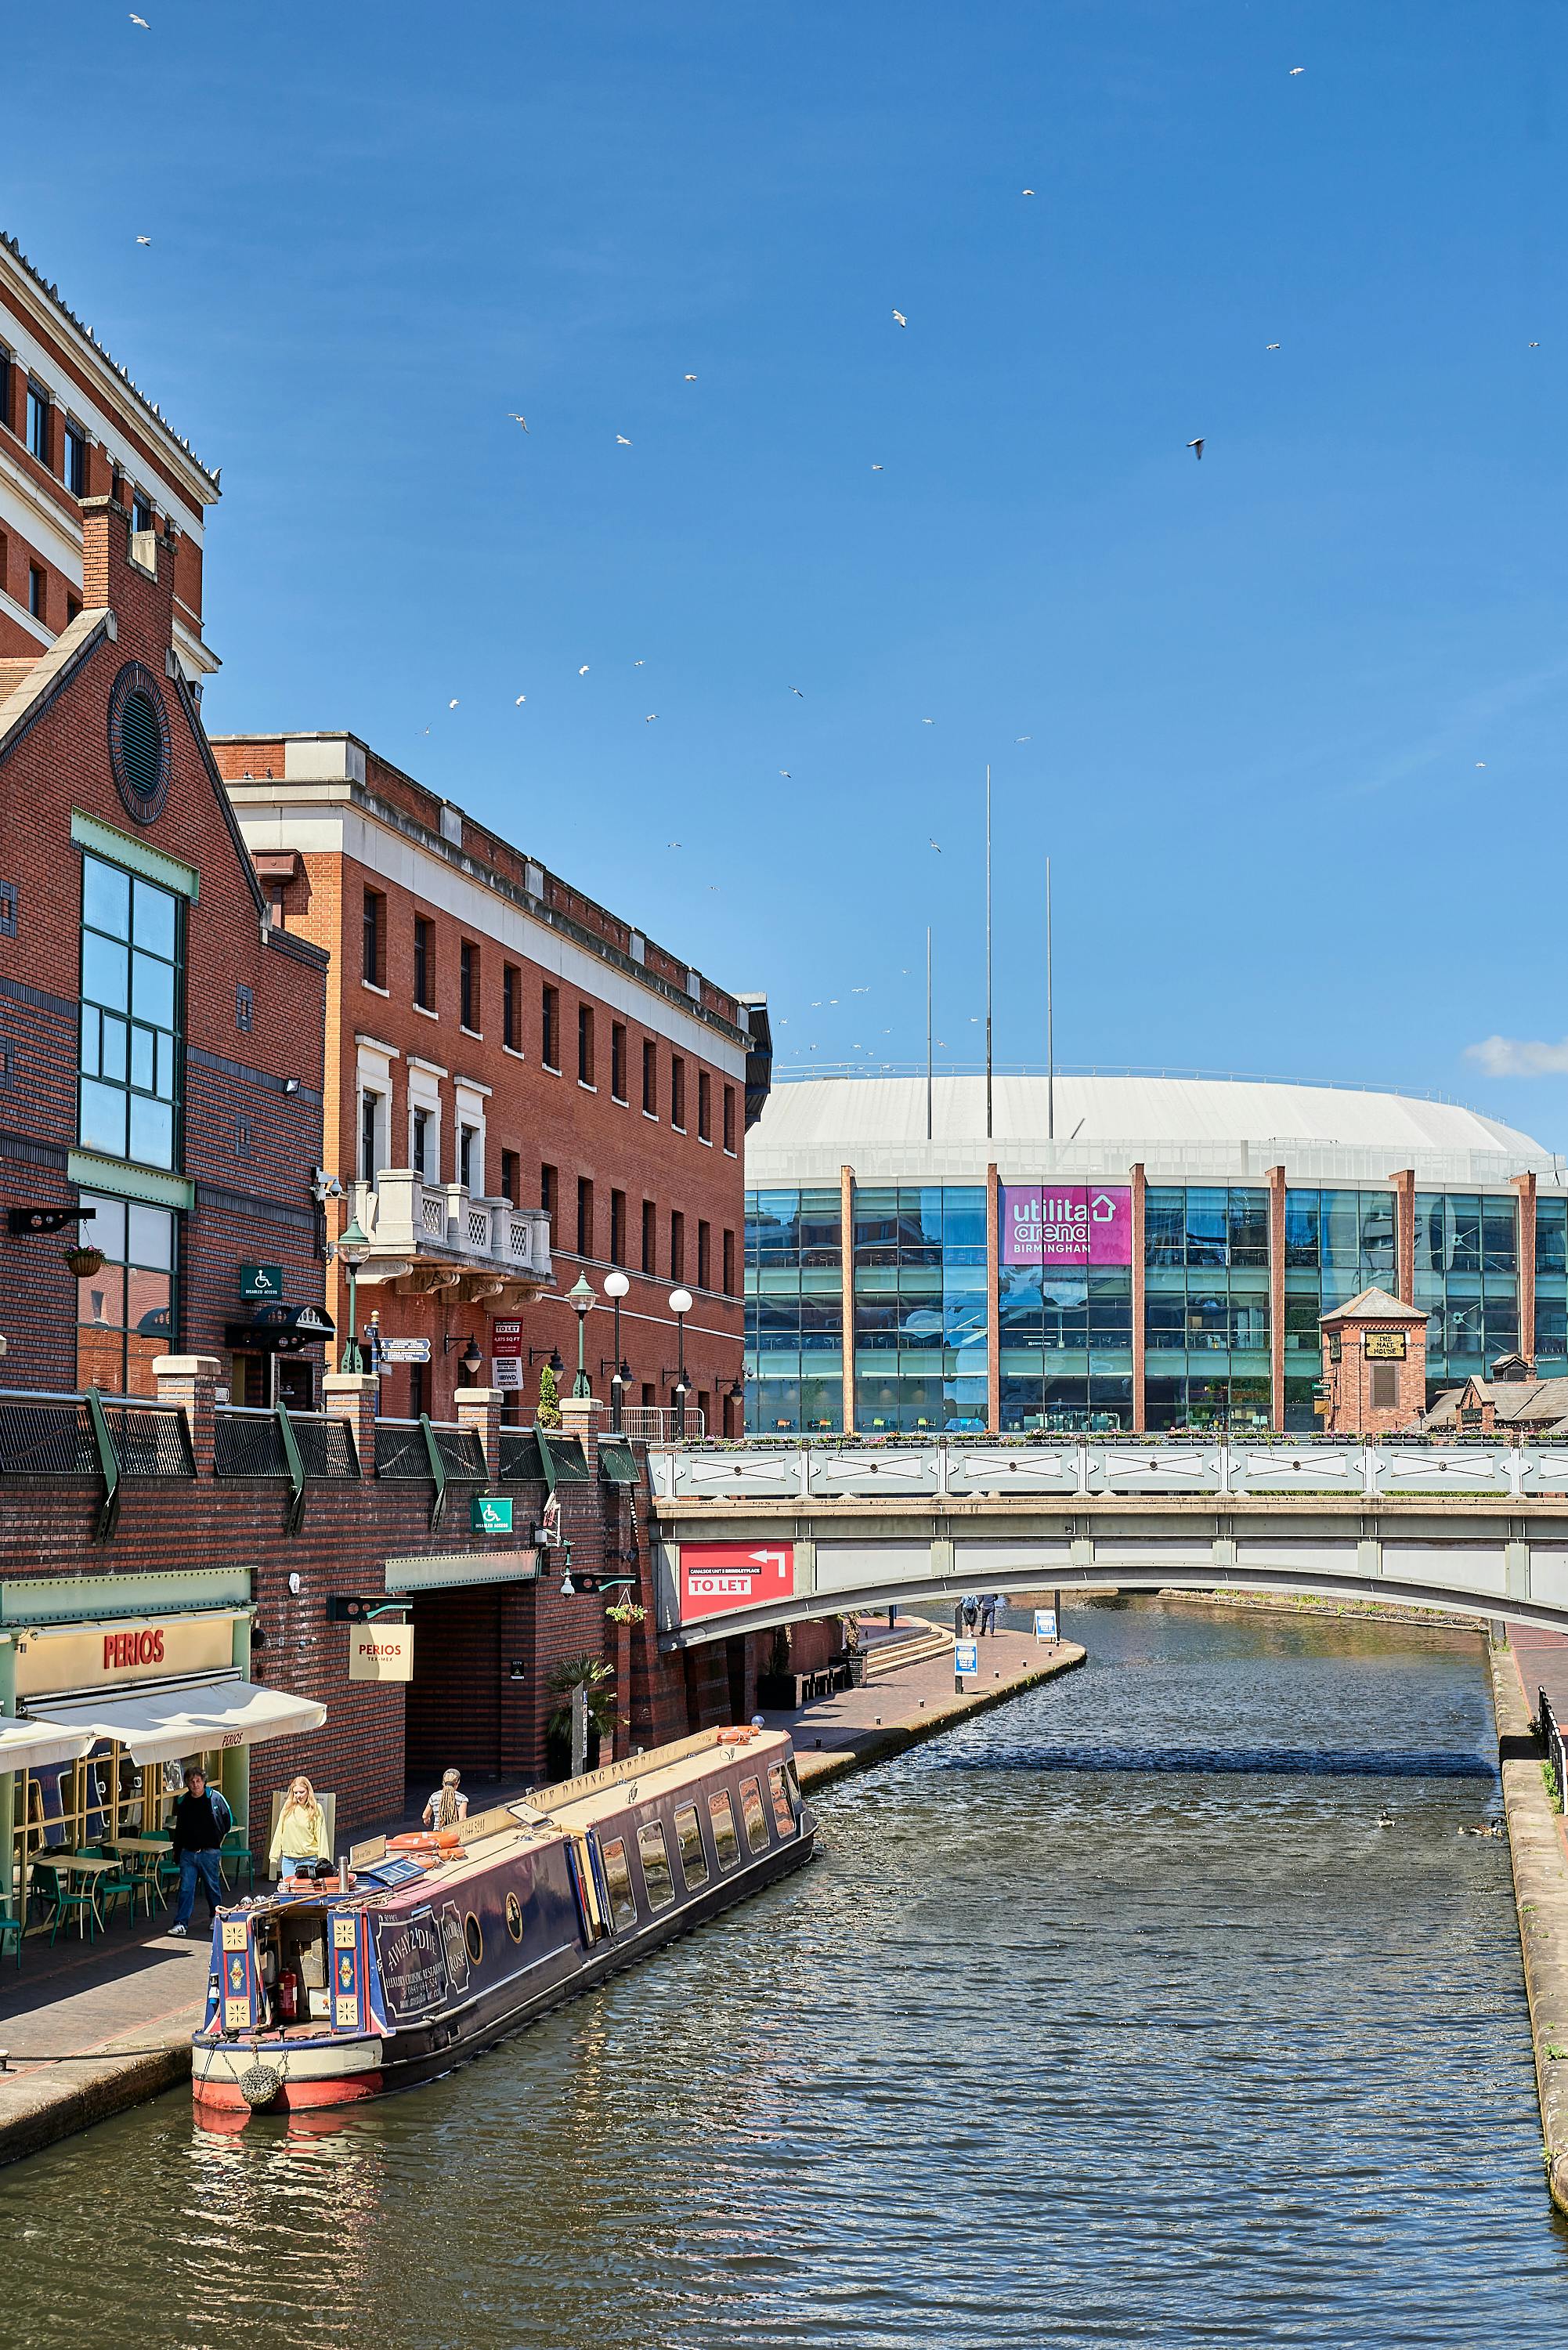 Brindleyplace situated just outside the heart of Birmingham’s city centre, and benefits from the excellent connectivity offered by a Metro terminal on your doorstep. The Metro offers access to both New Street and Snowhill Stations in under 10 minutes.